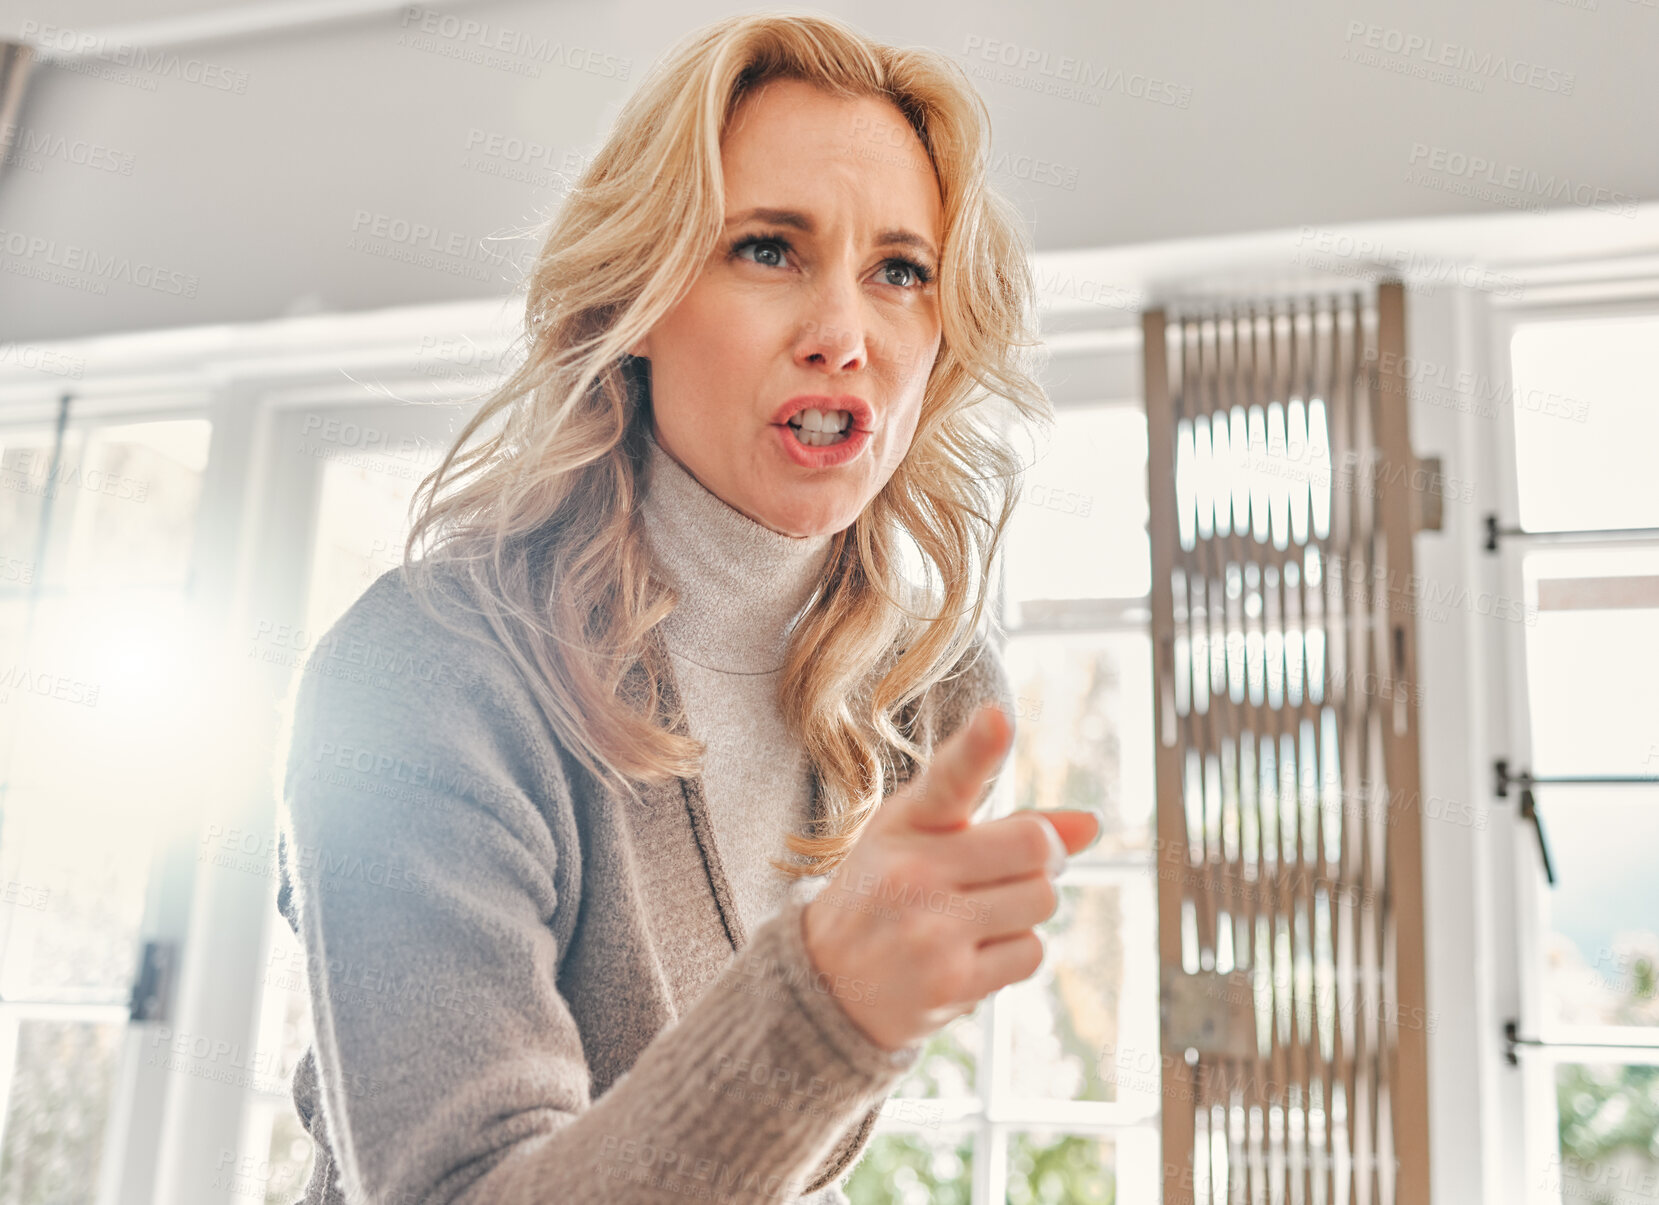 Buy stock photo Shot of a mature woman looking upset while scolding someone at home